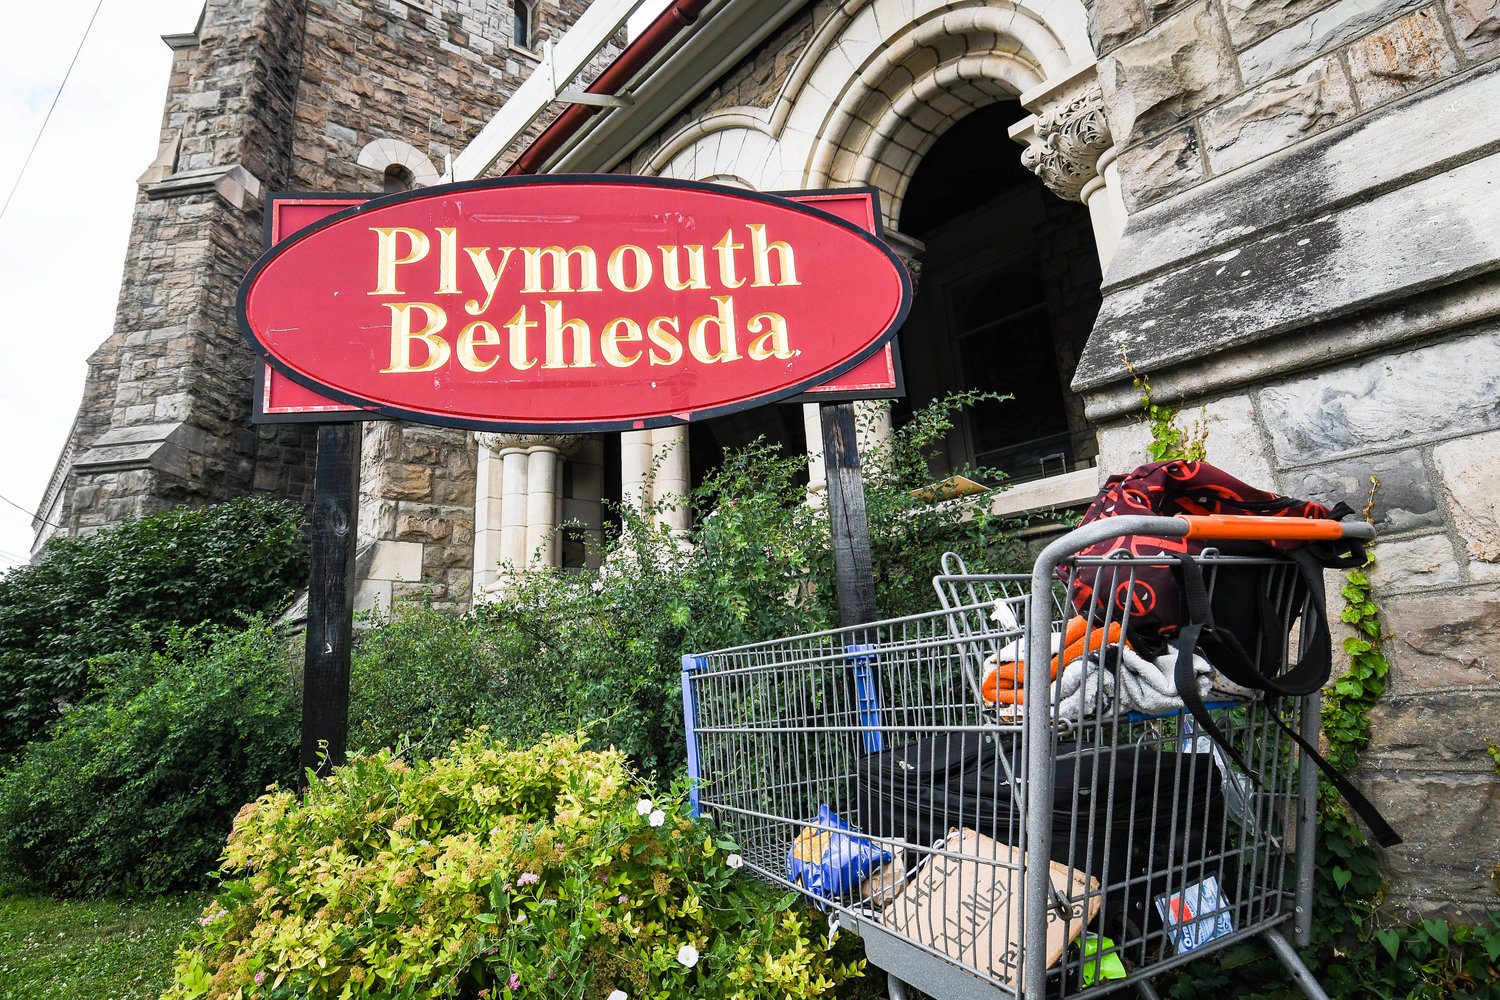 A shopping cart is left in front of Cornerstone Plymouth Bethesda Church in Utica. The church helps aid the homeless community as much as possible.